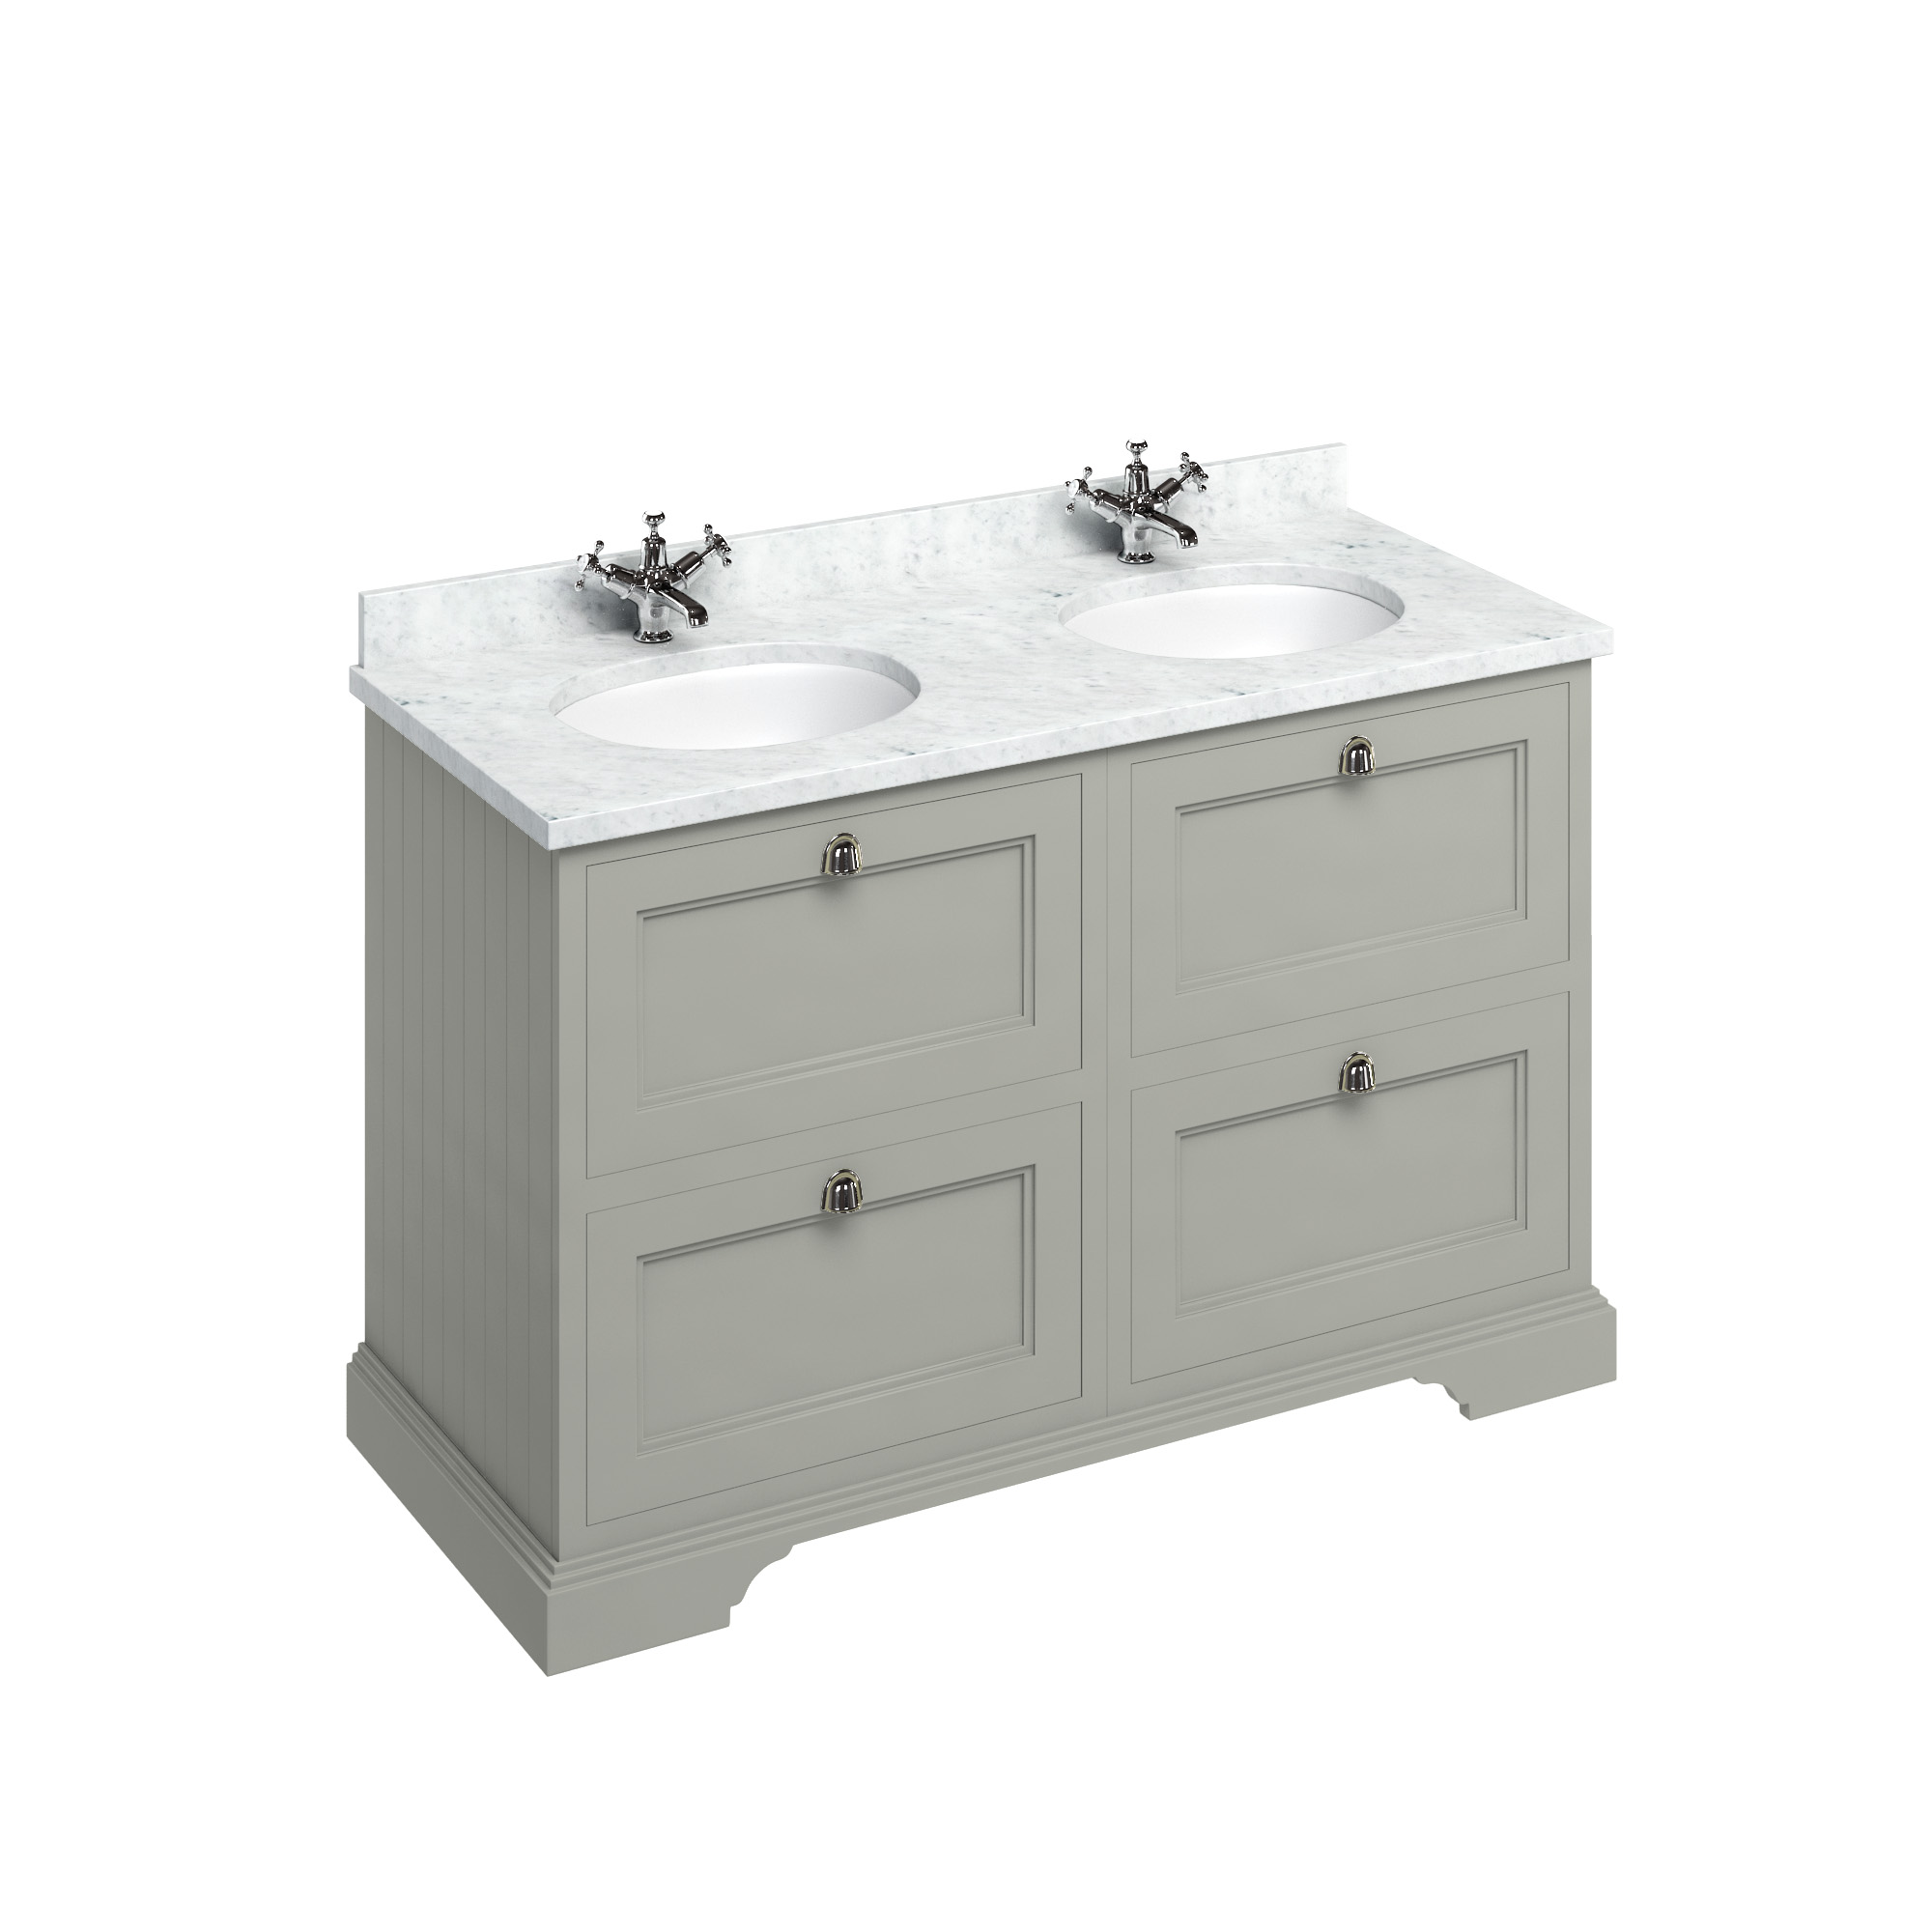 130 Freestanding Vanity Unit with Drawers